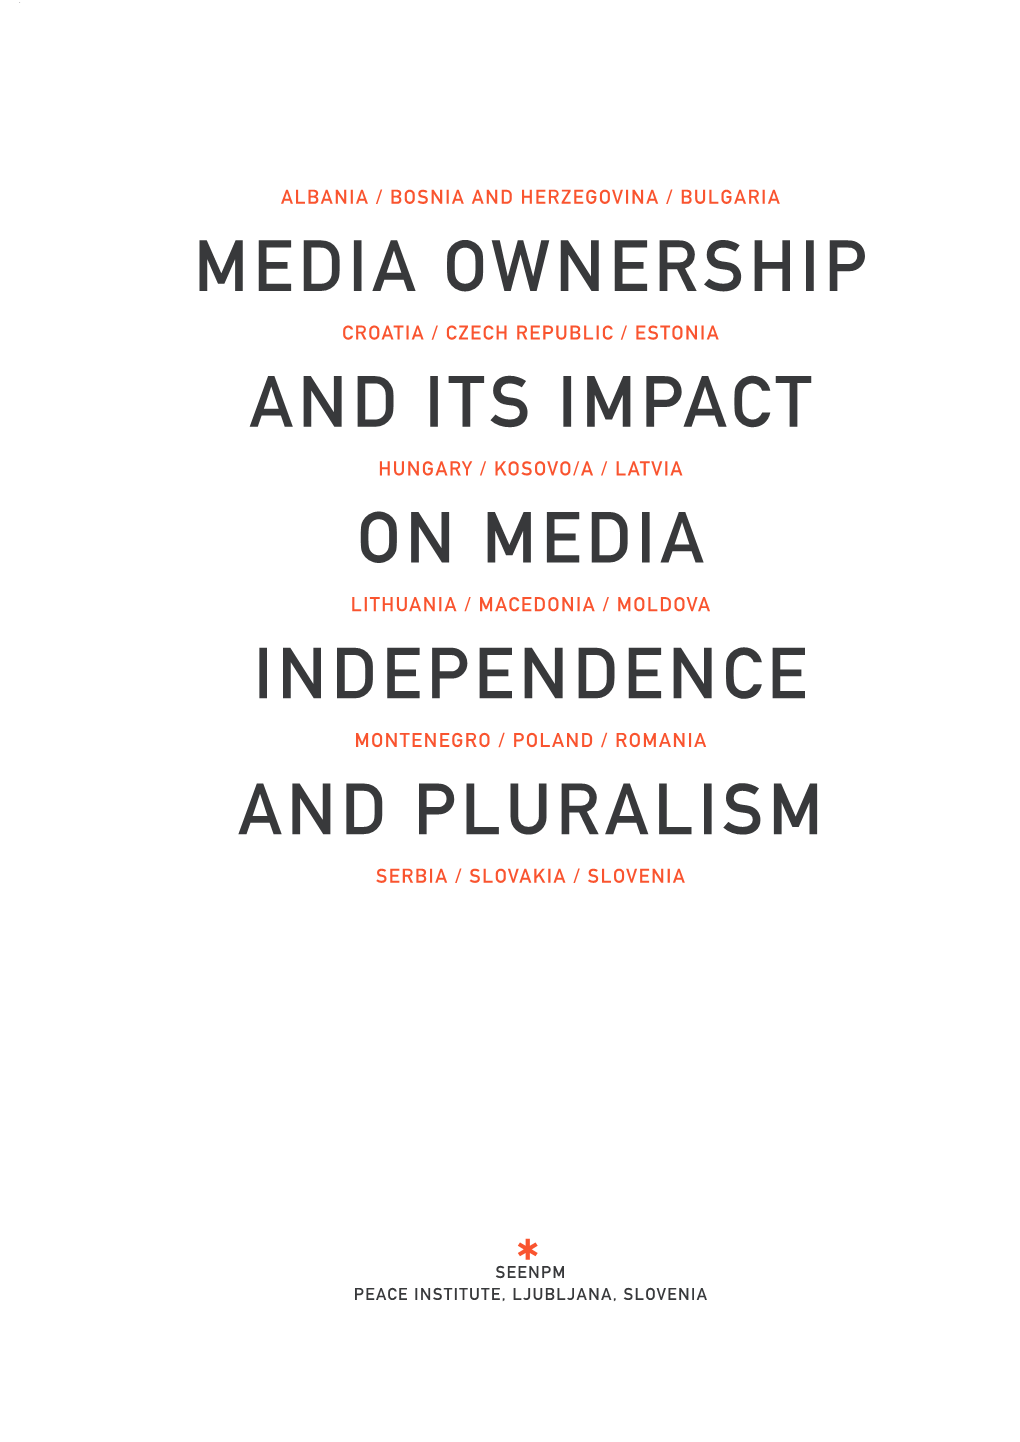 Media Ownership and Its Impact on Media Independence and Pluralism